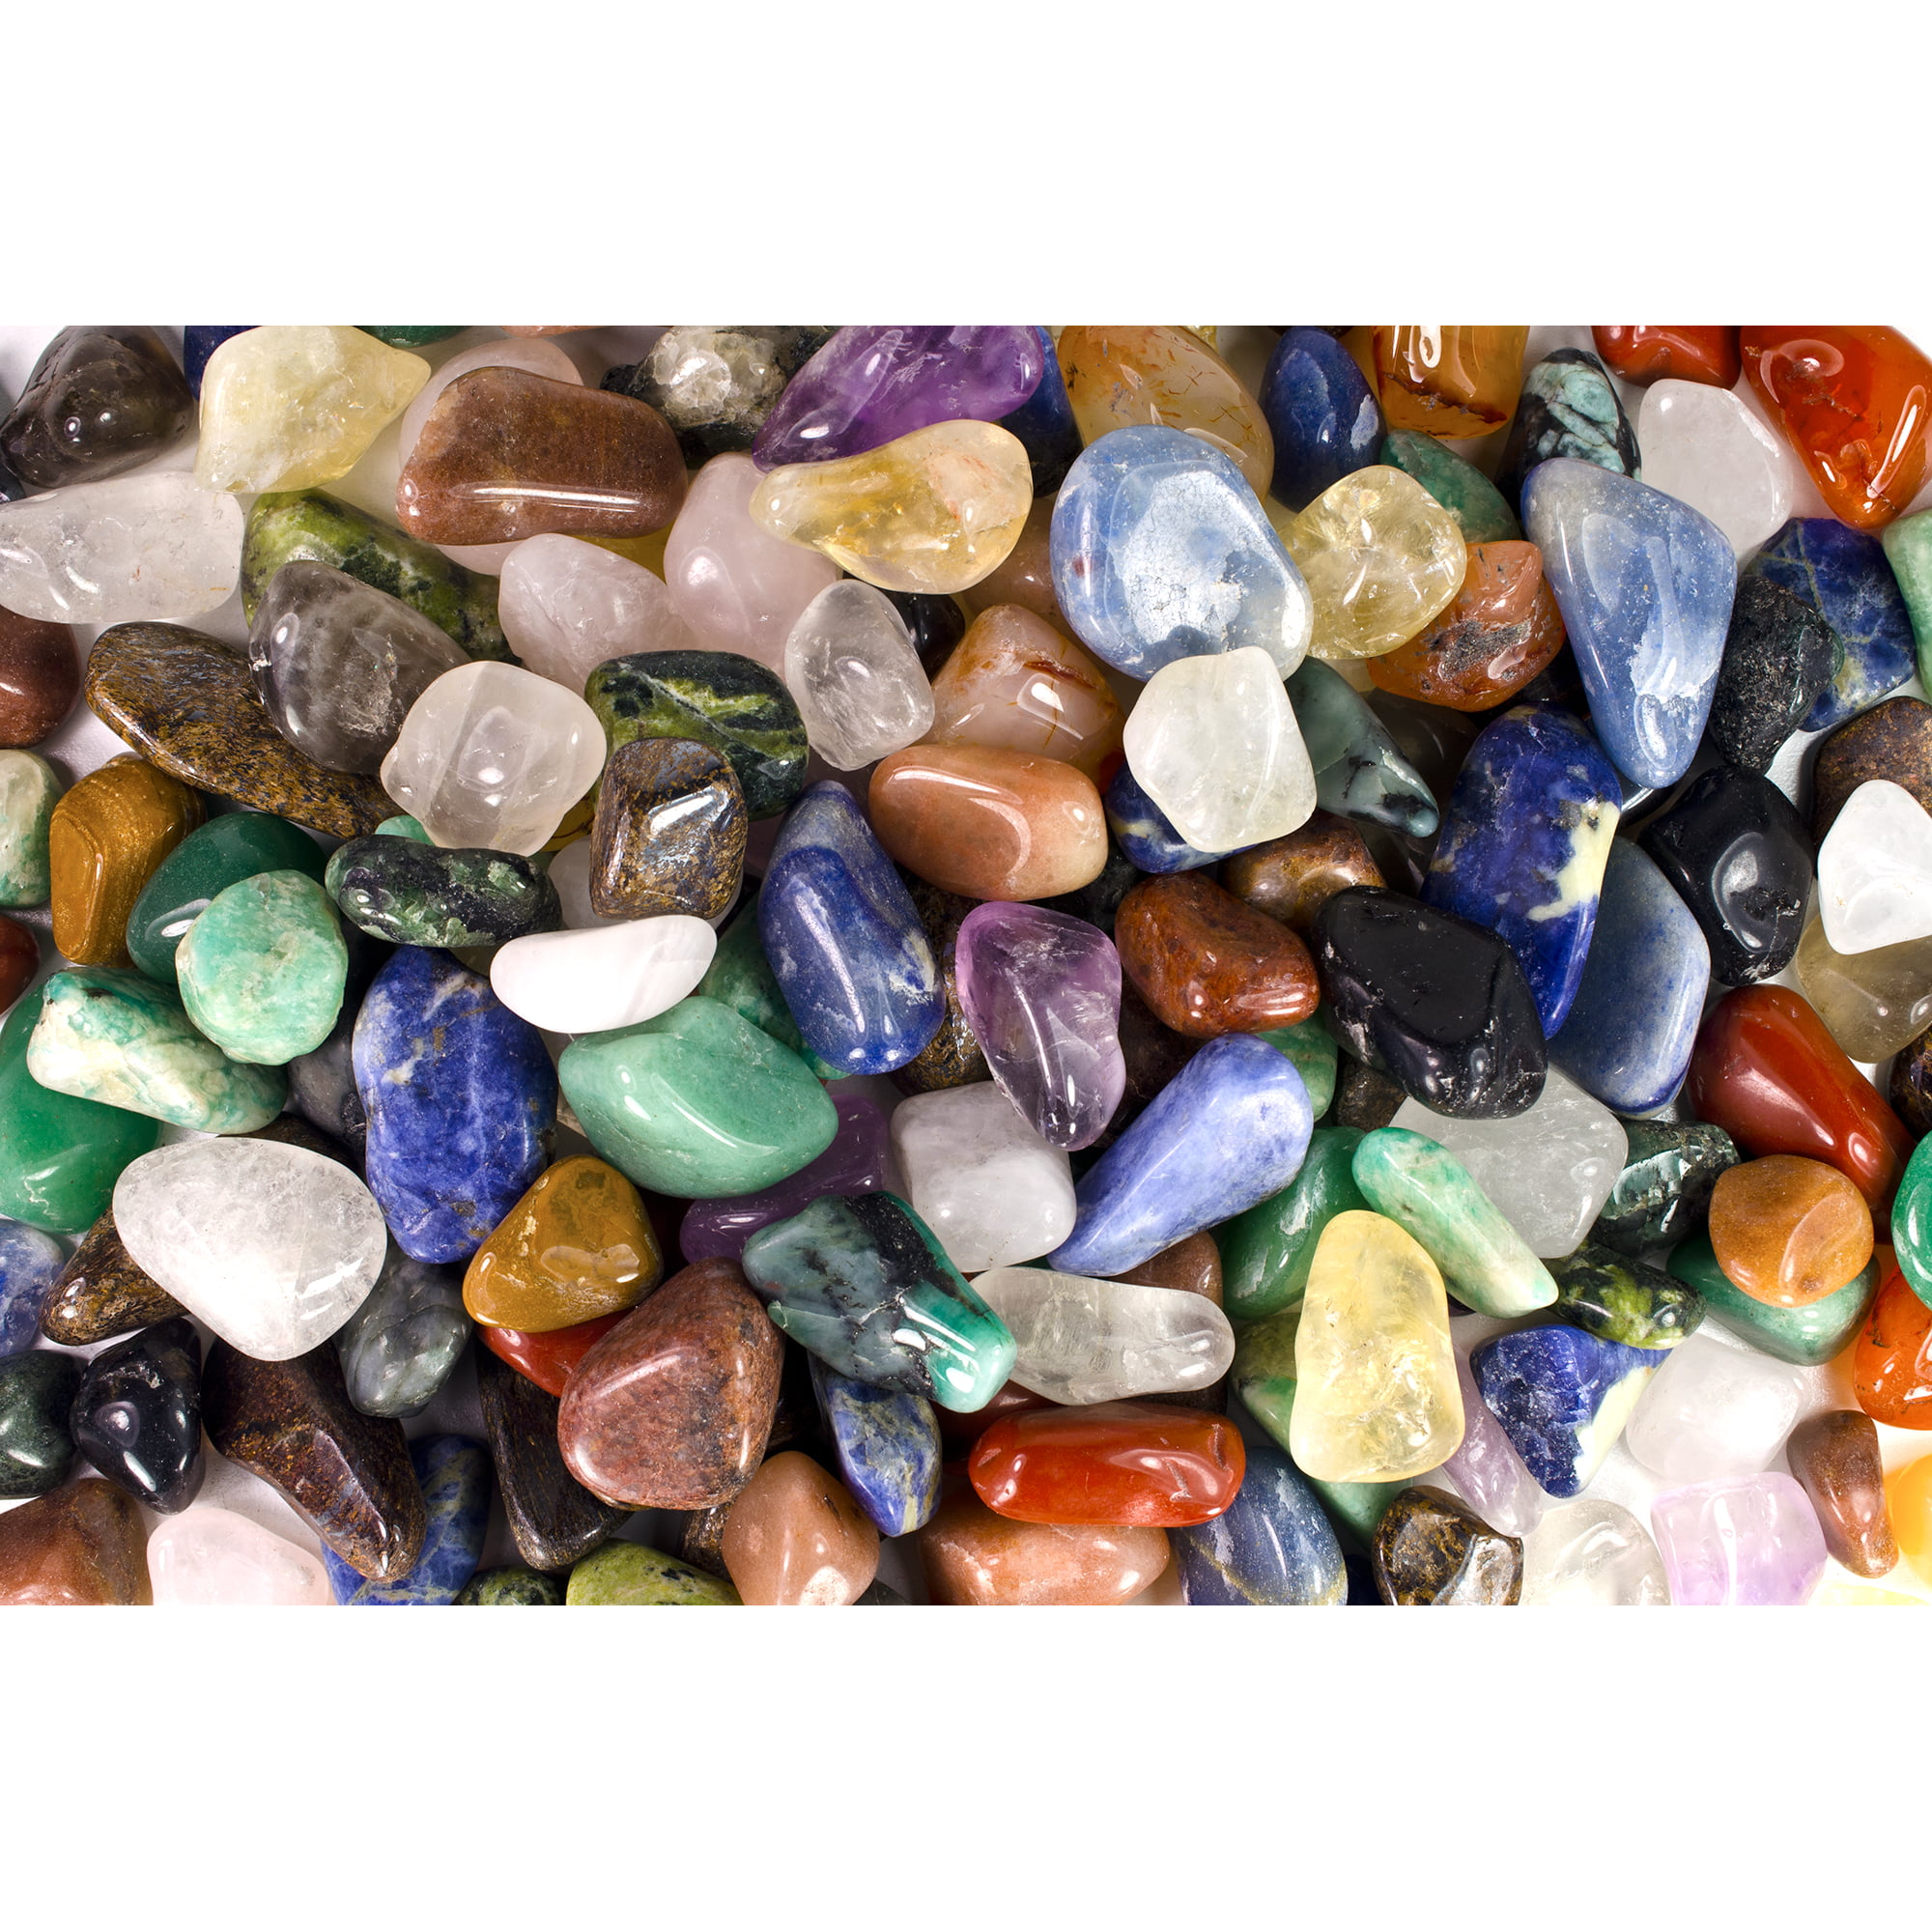 Fantasia Crystal Vault: 3 Pounds of Tumbled Stones from Brazil - Polished Natural - Assorted Mix - Small Size - 0.5" to (Average 0.75") - Walmart.com